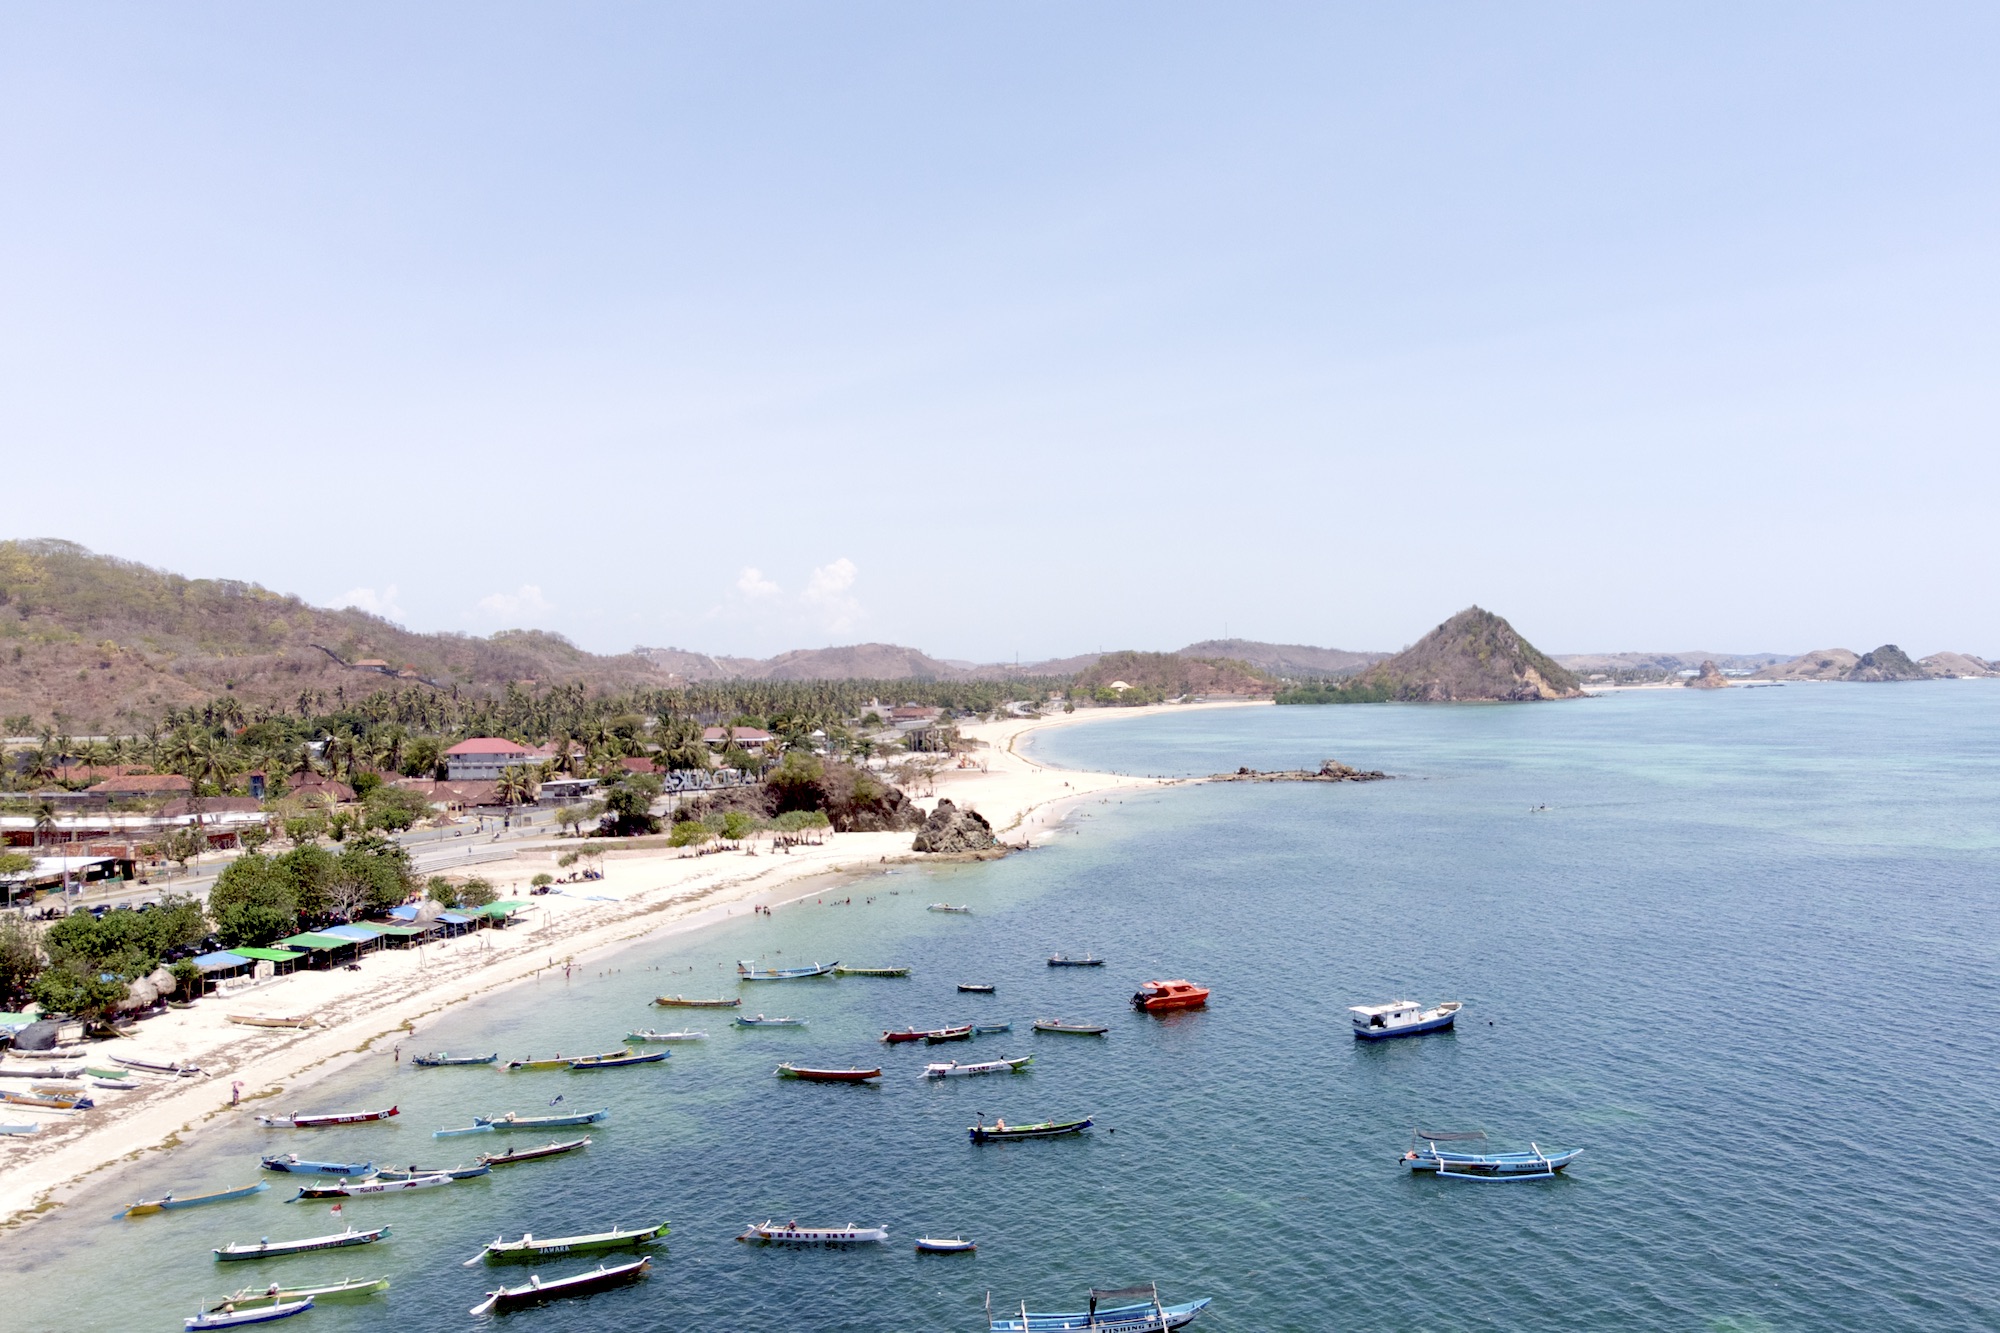 MotoGP – Bringing the World’s Stage to Lombok